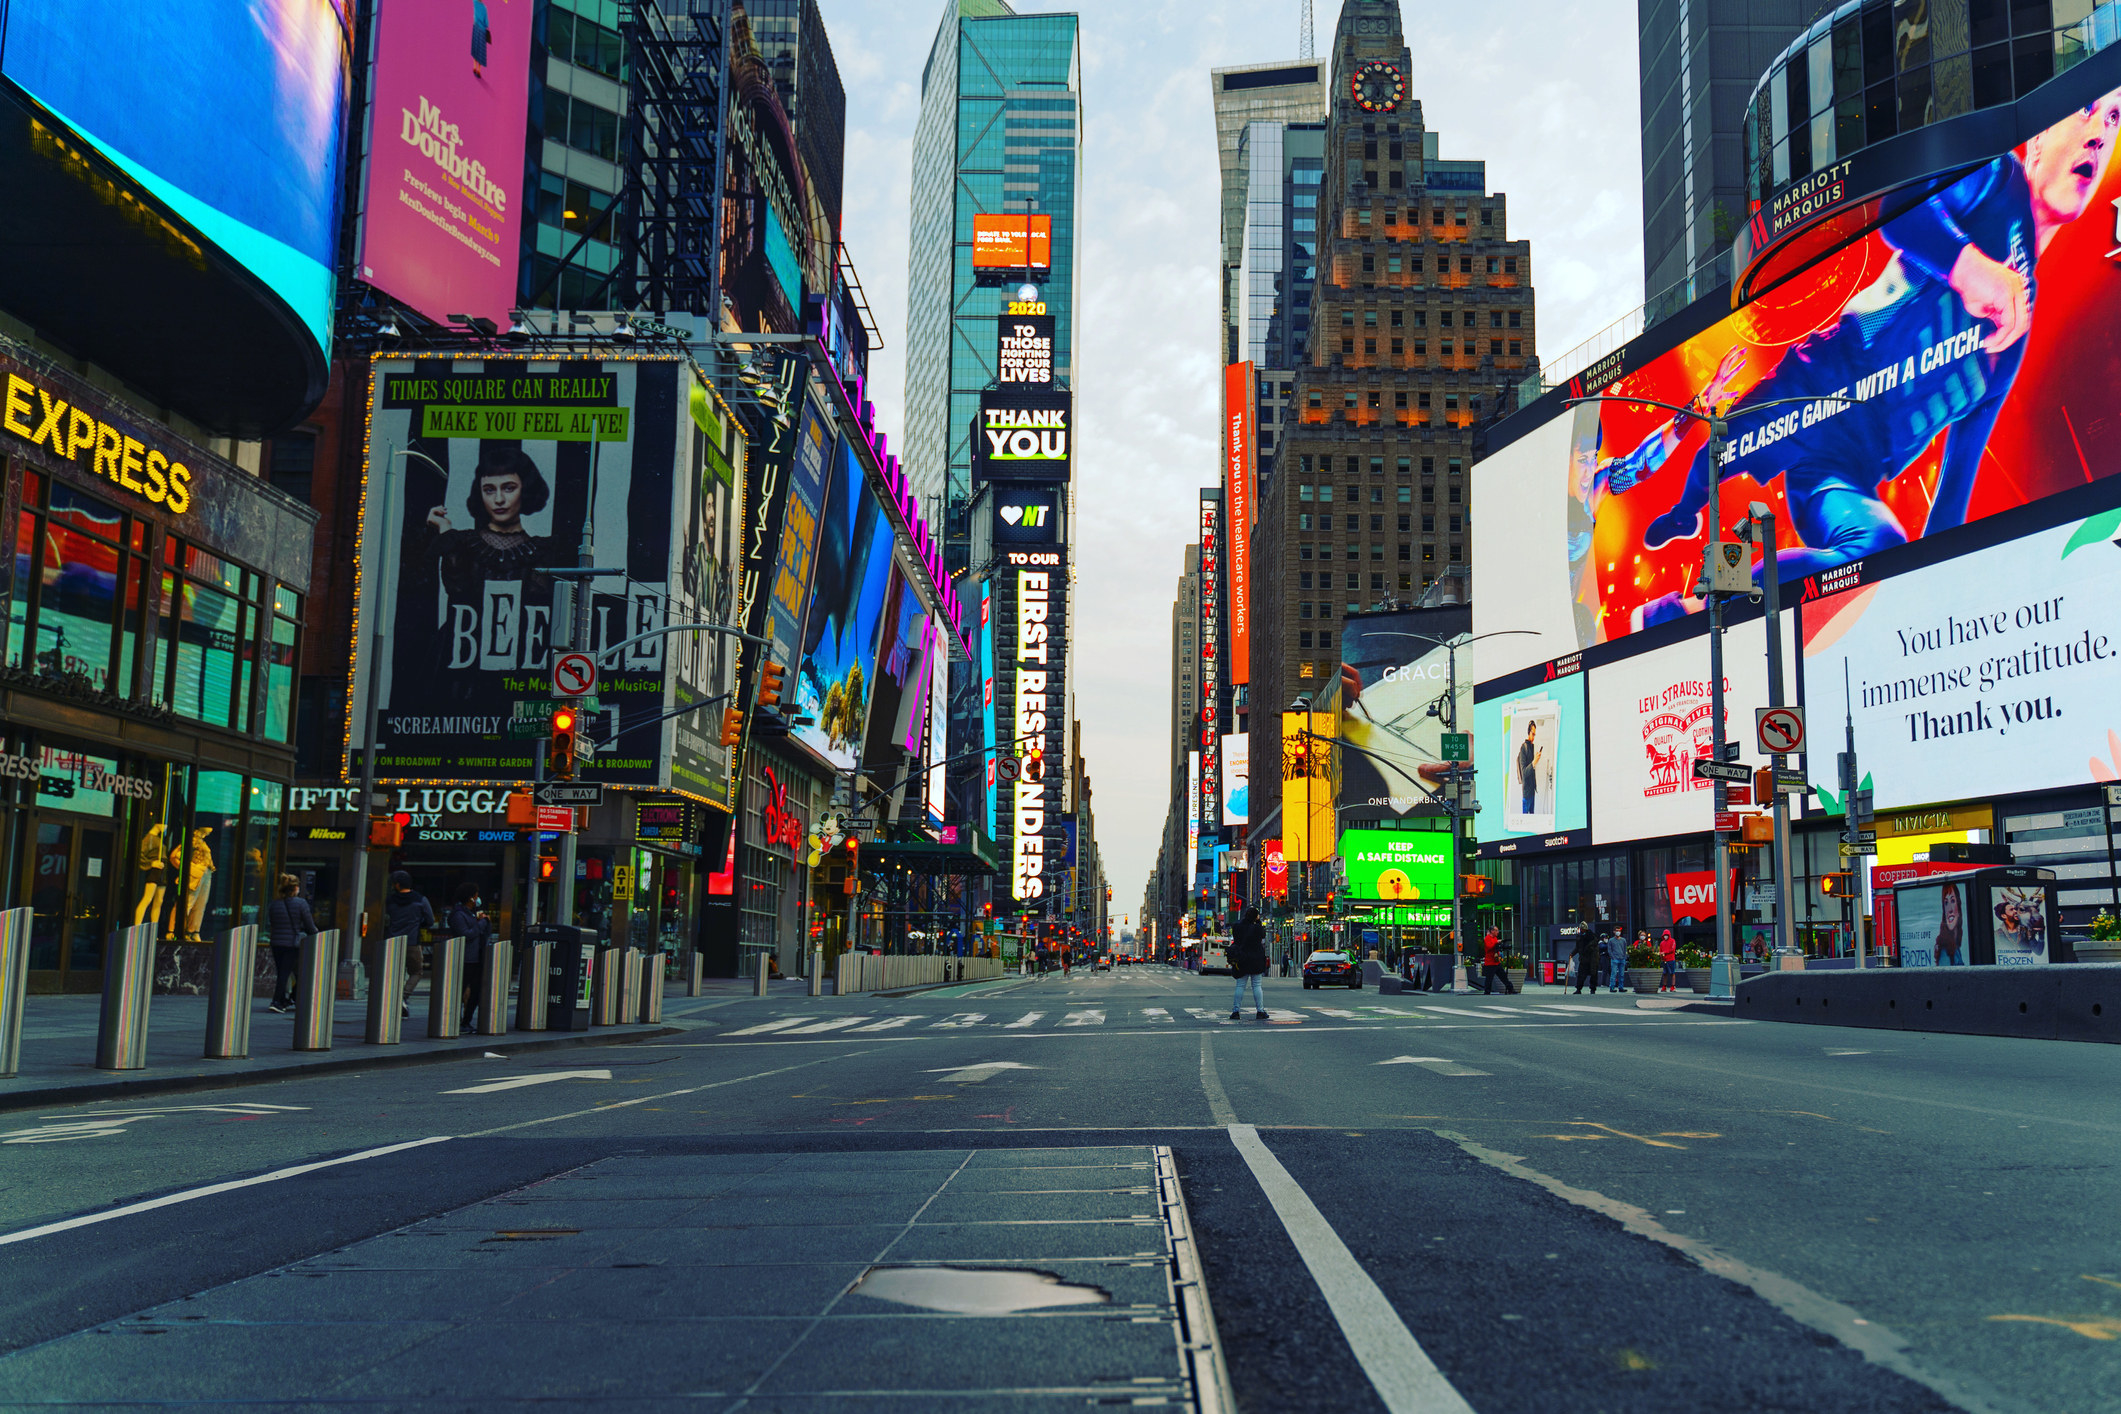 A view of eerily quiet and empty Times Square amid COVID-19